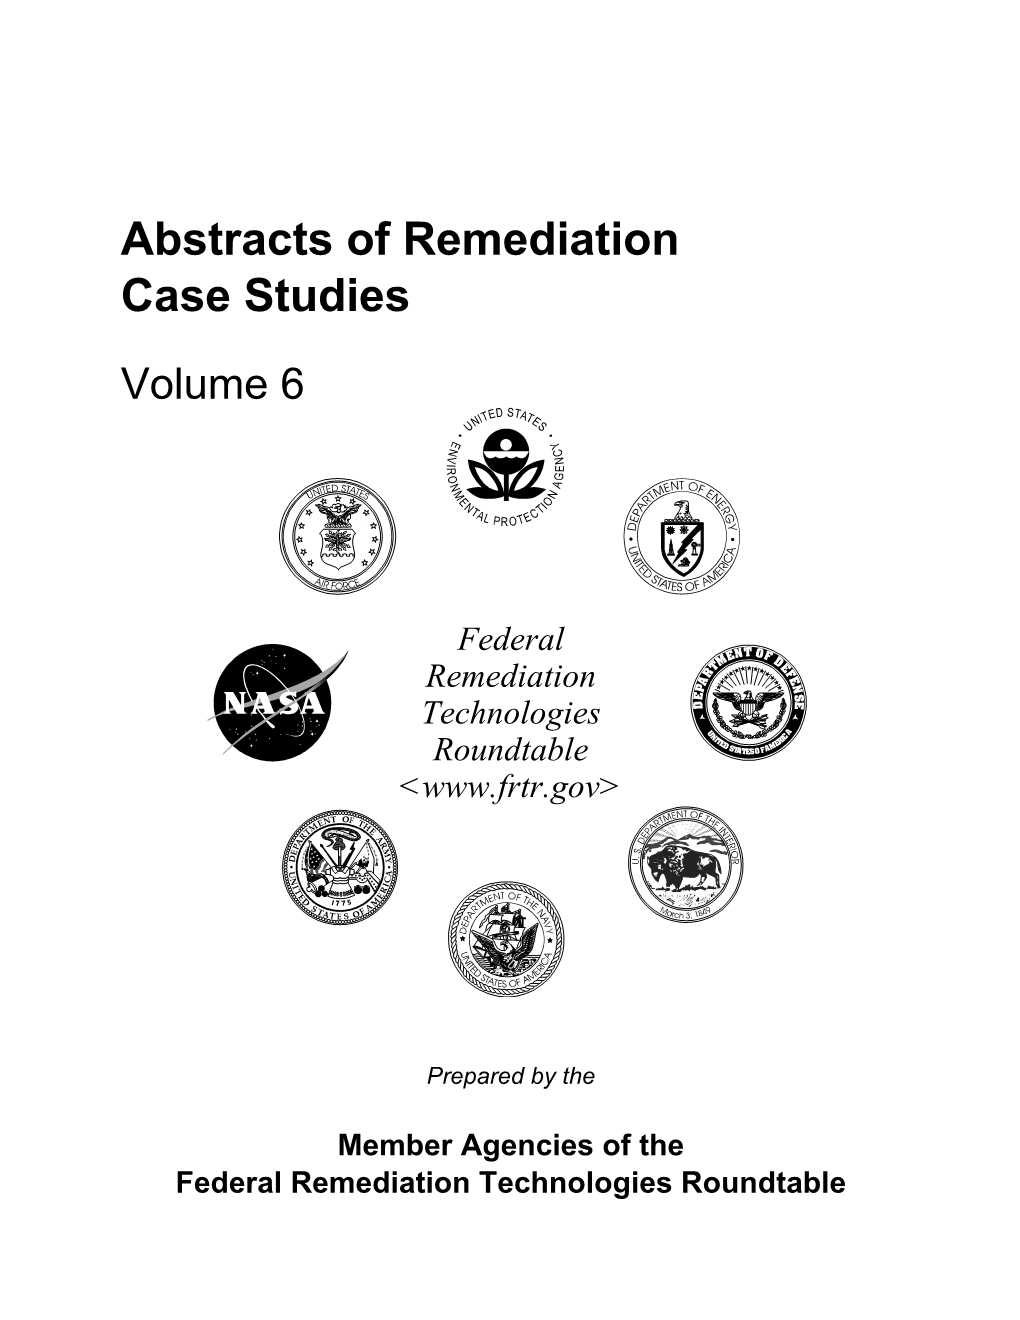 Abstracts of Remediation Case Studies Volume 6